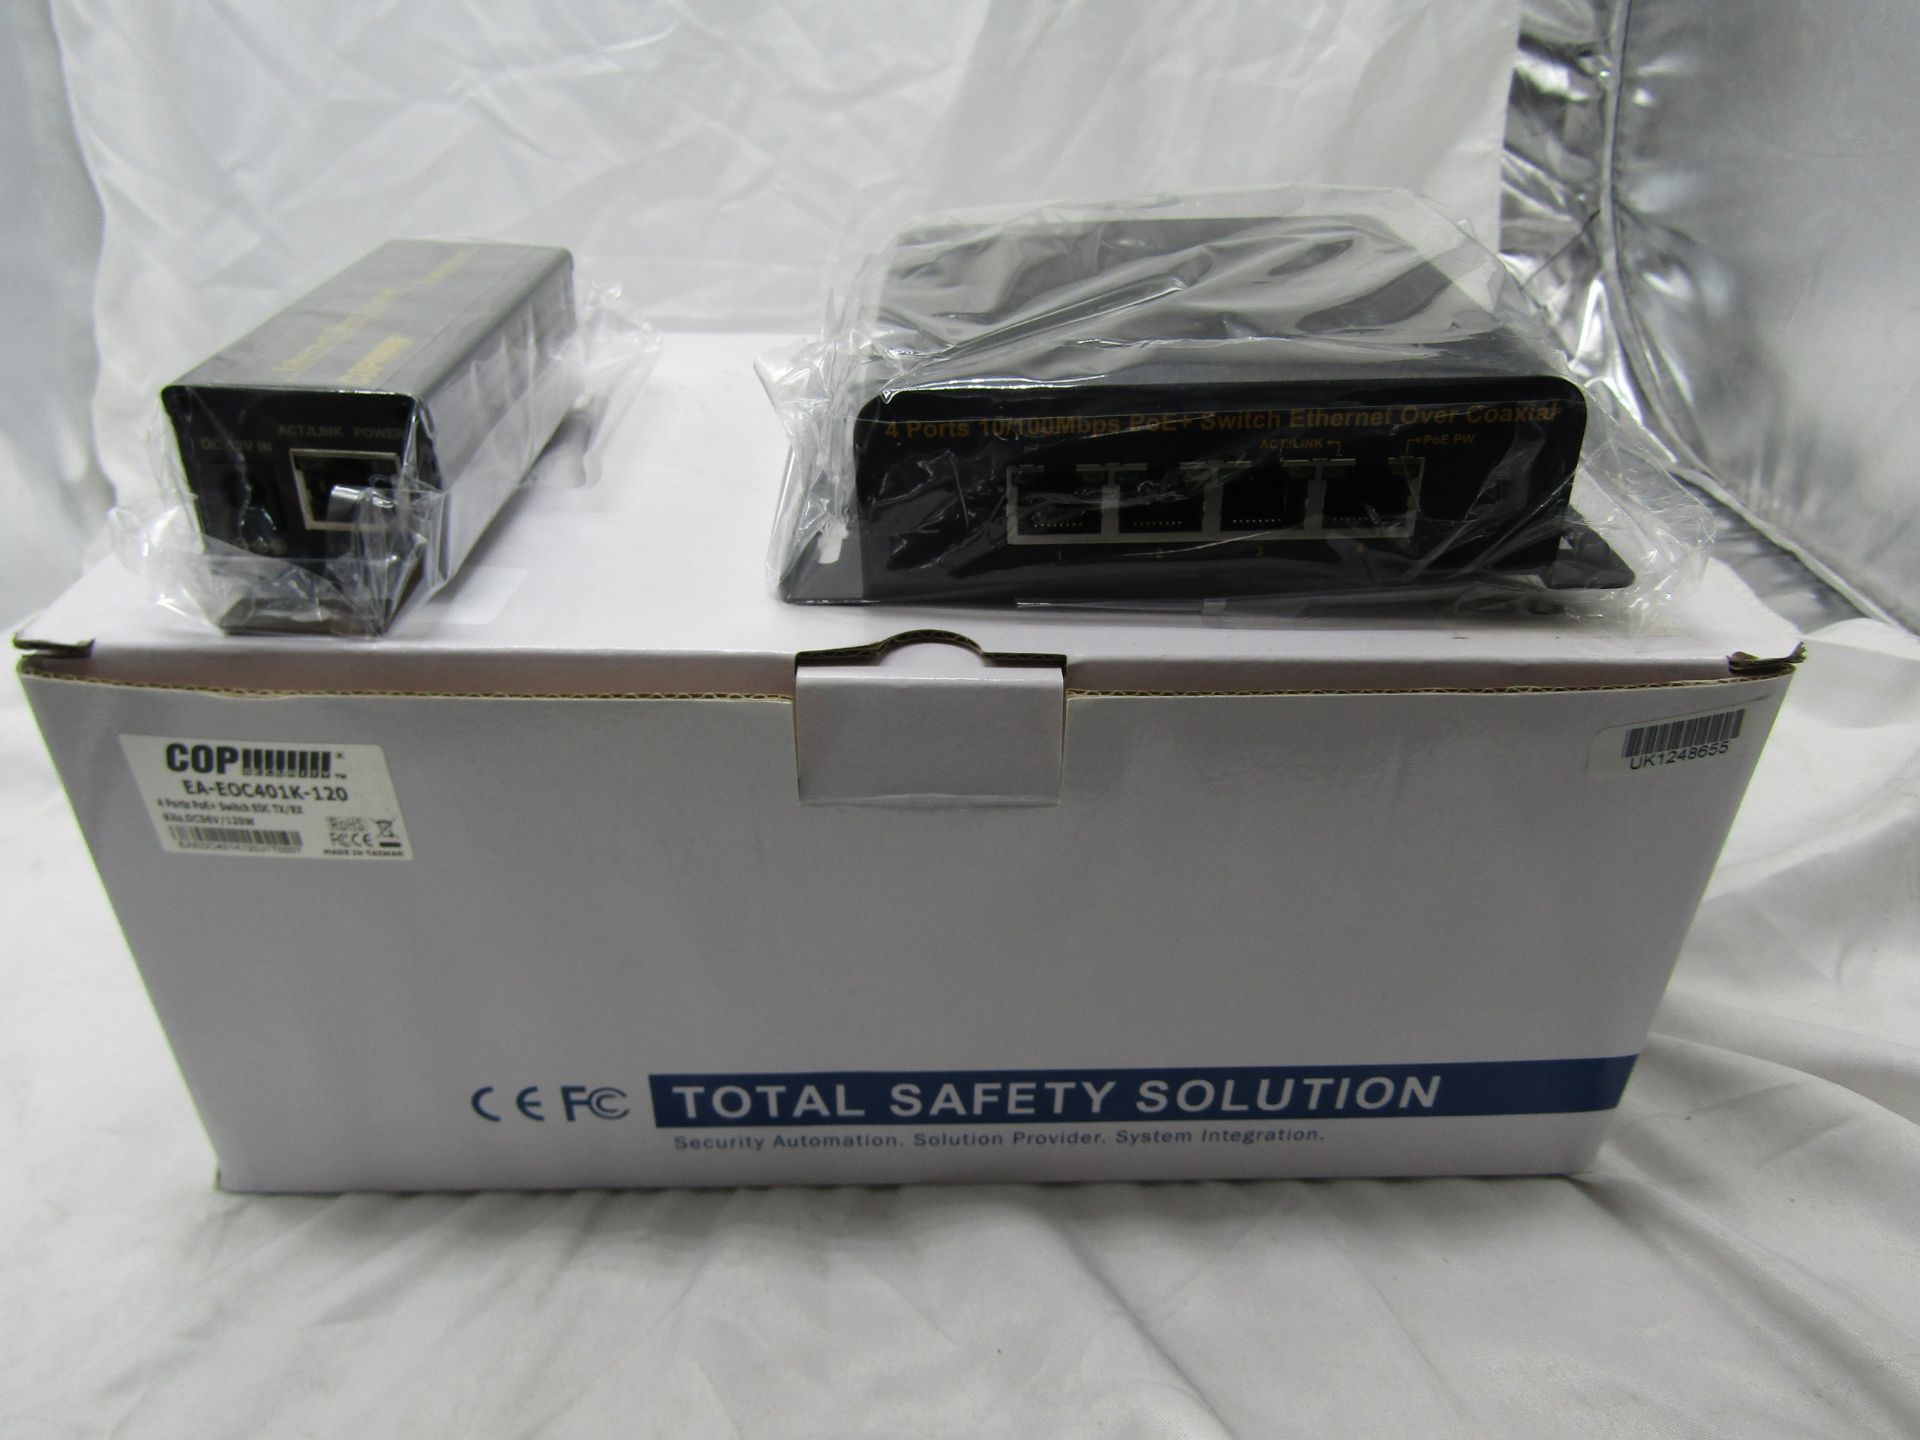 one lot of over 200 items of CCTV and Surveillance equipment, includes DVRs, Cameras, Thermal - Image 88 of 104